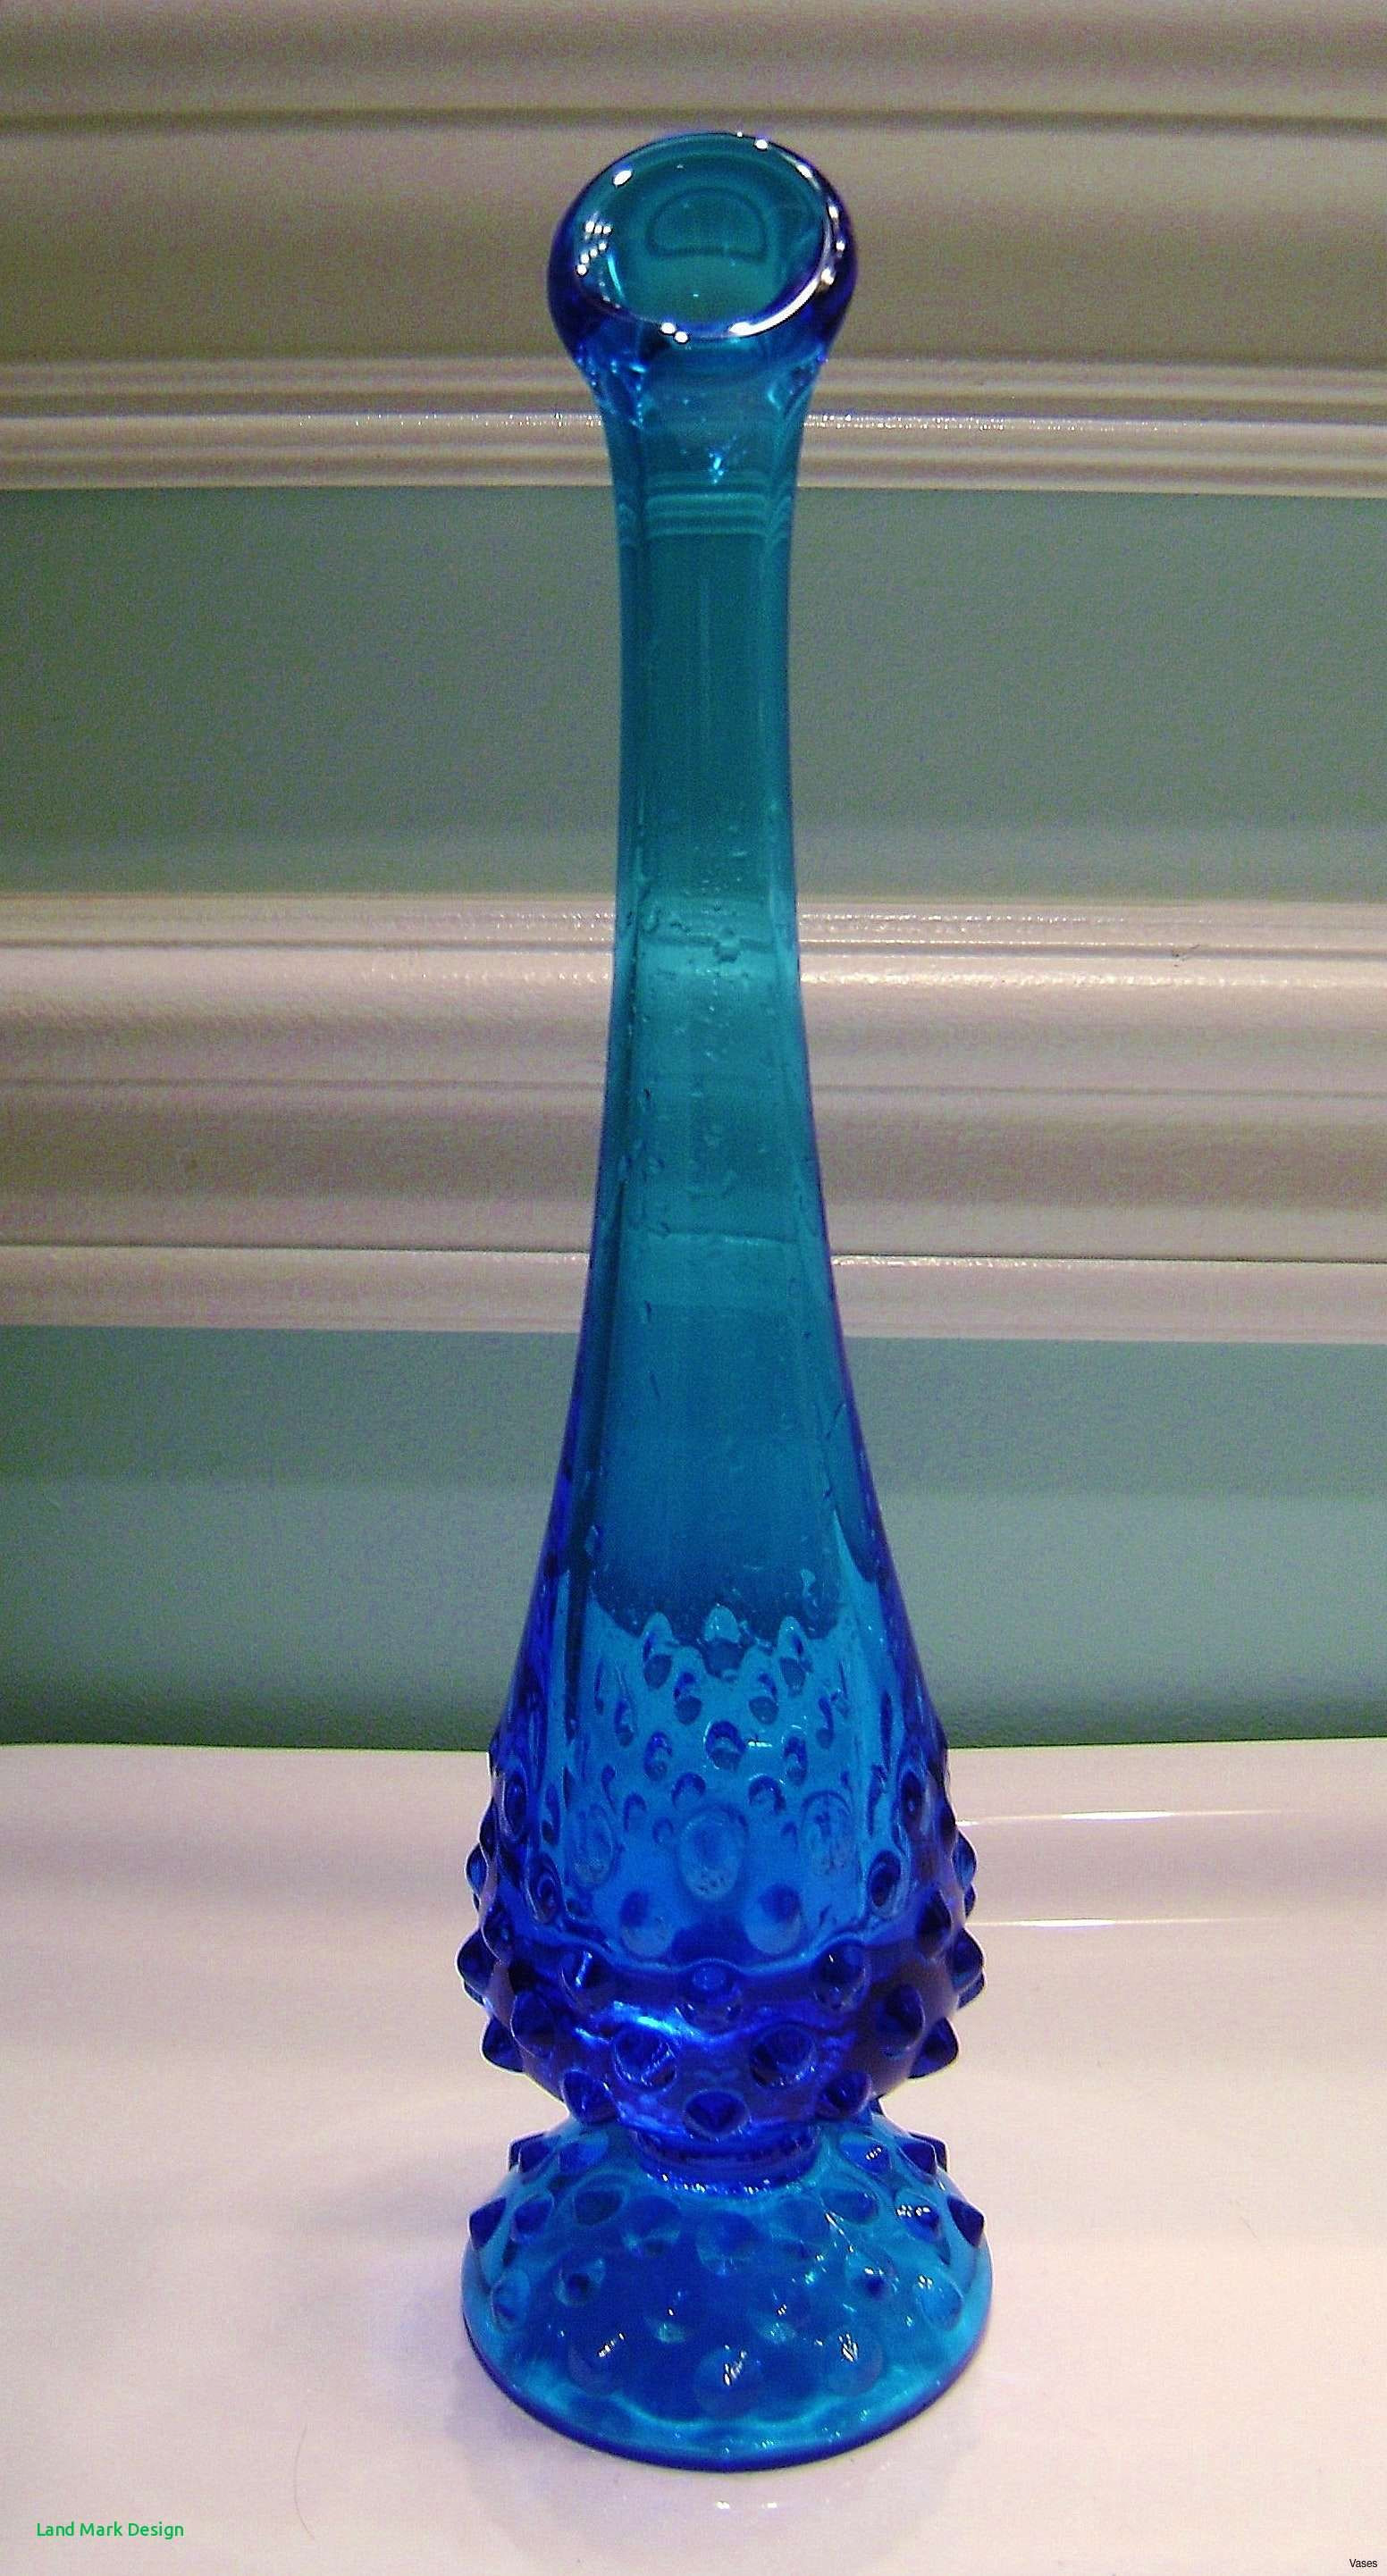 Little Bud Vases Of 22 Hobnail Glass Vase the Weekly World with Teal Clour Home Design Vases Blue Hobnail Vase Fenton Colonial Swung Bud Vasei 0d